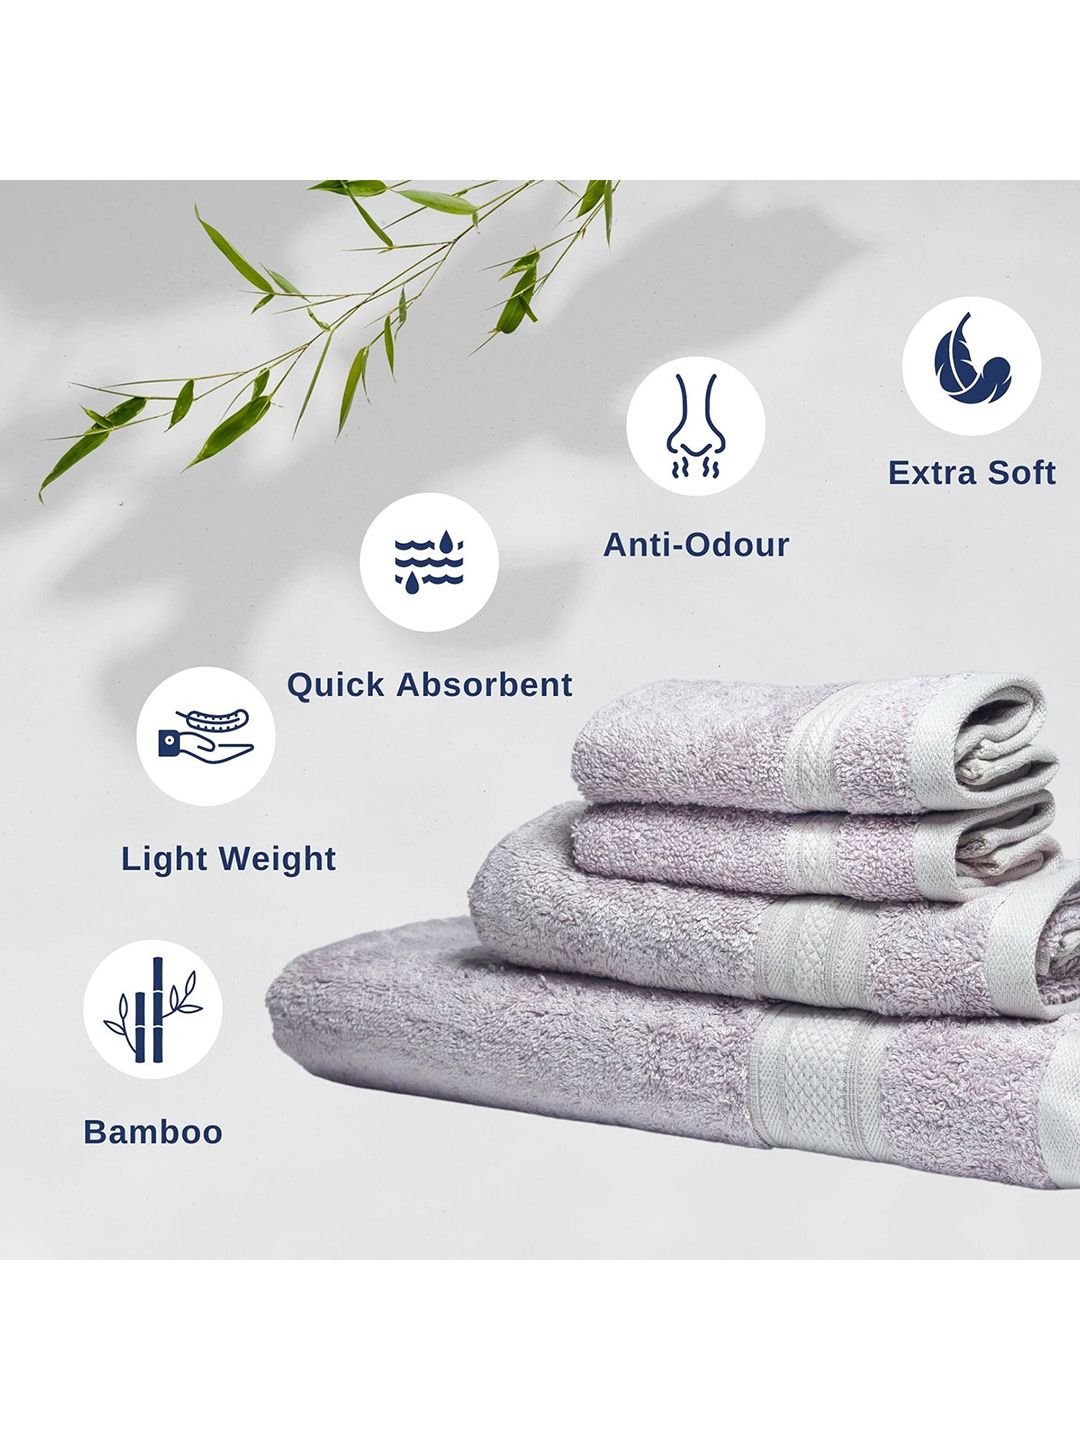 Kawach Peach Antimicrobial Soft Bamboo Towel Set Price in India